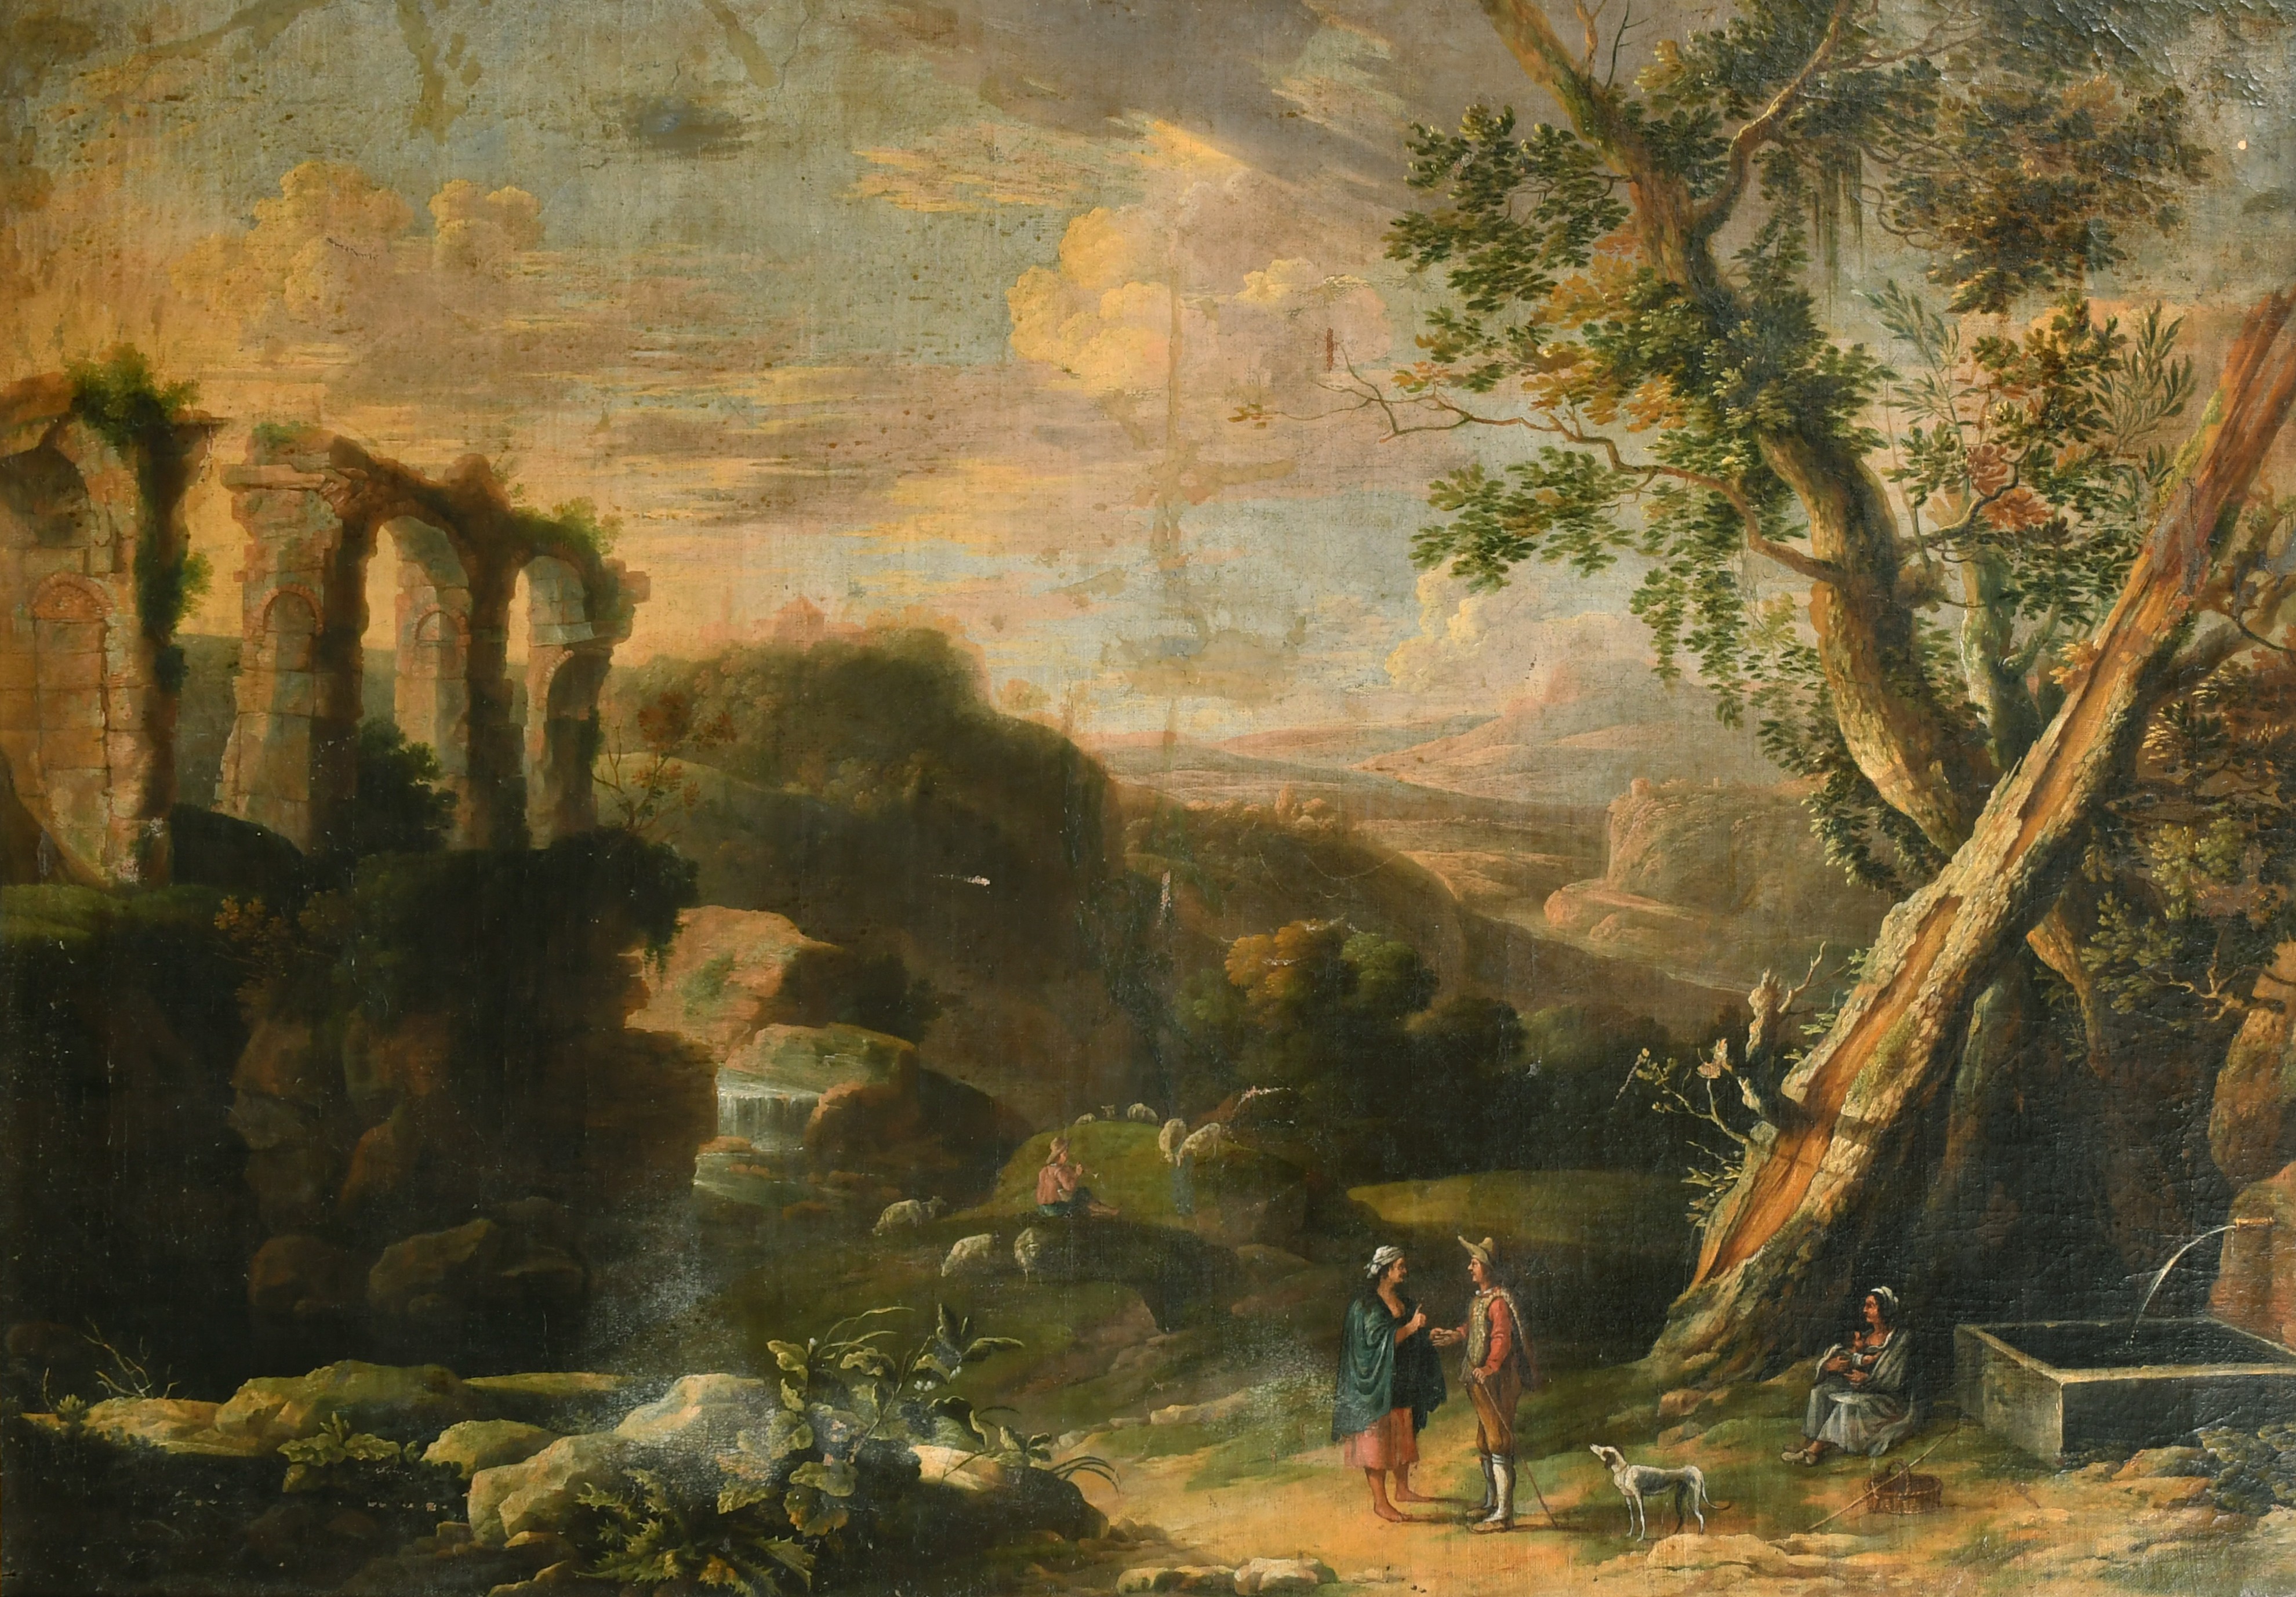 17th Century Italian School. Figures in a Classical Landscape, Oil on canvas, 32" x 46.25" (81.3 x